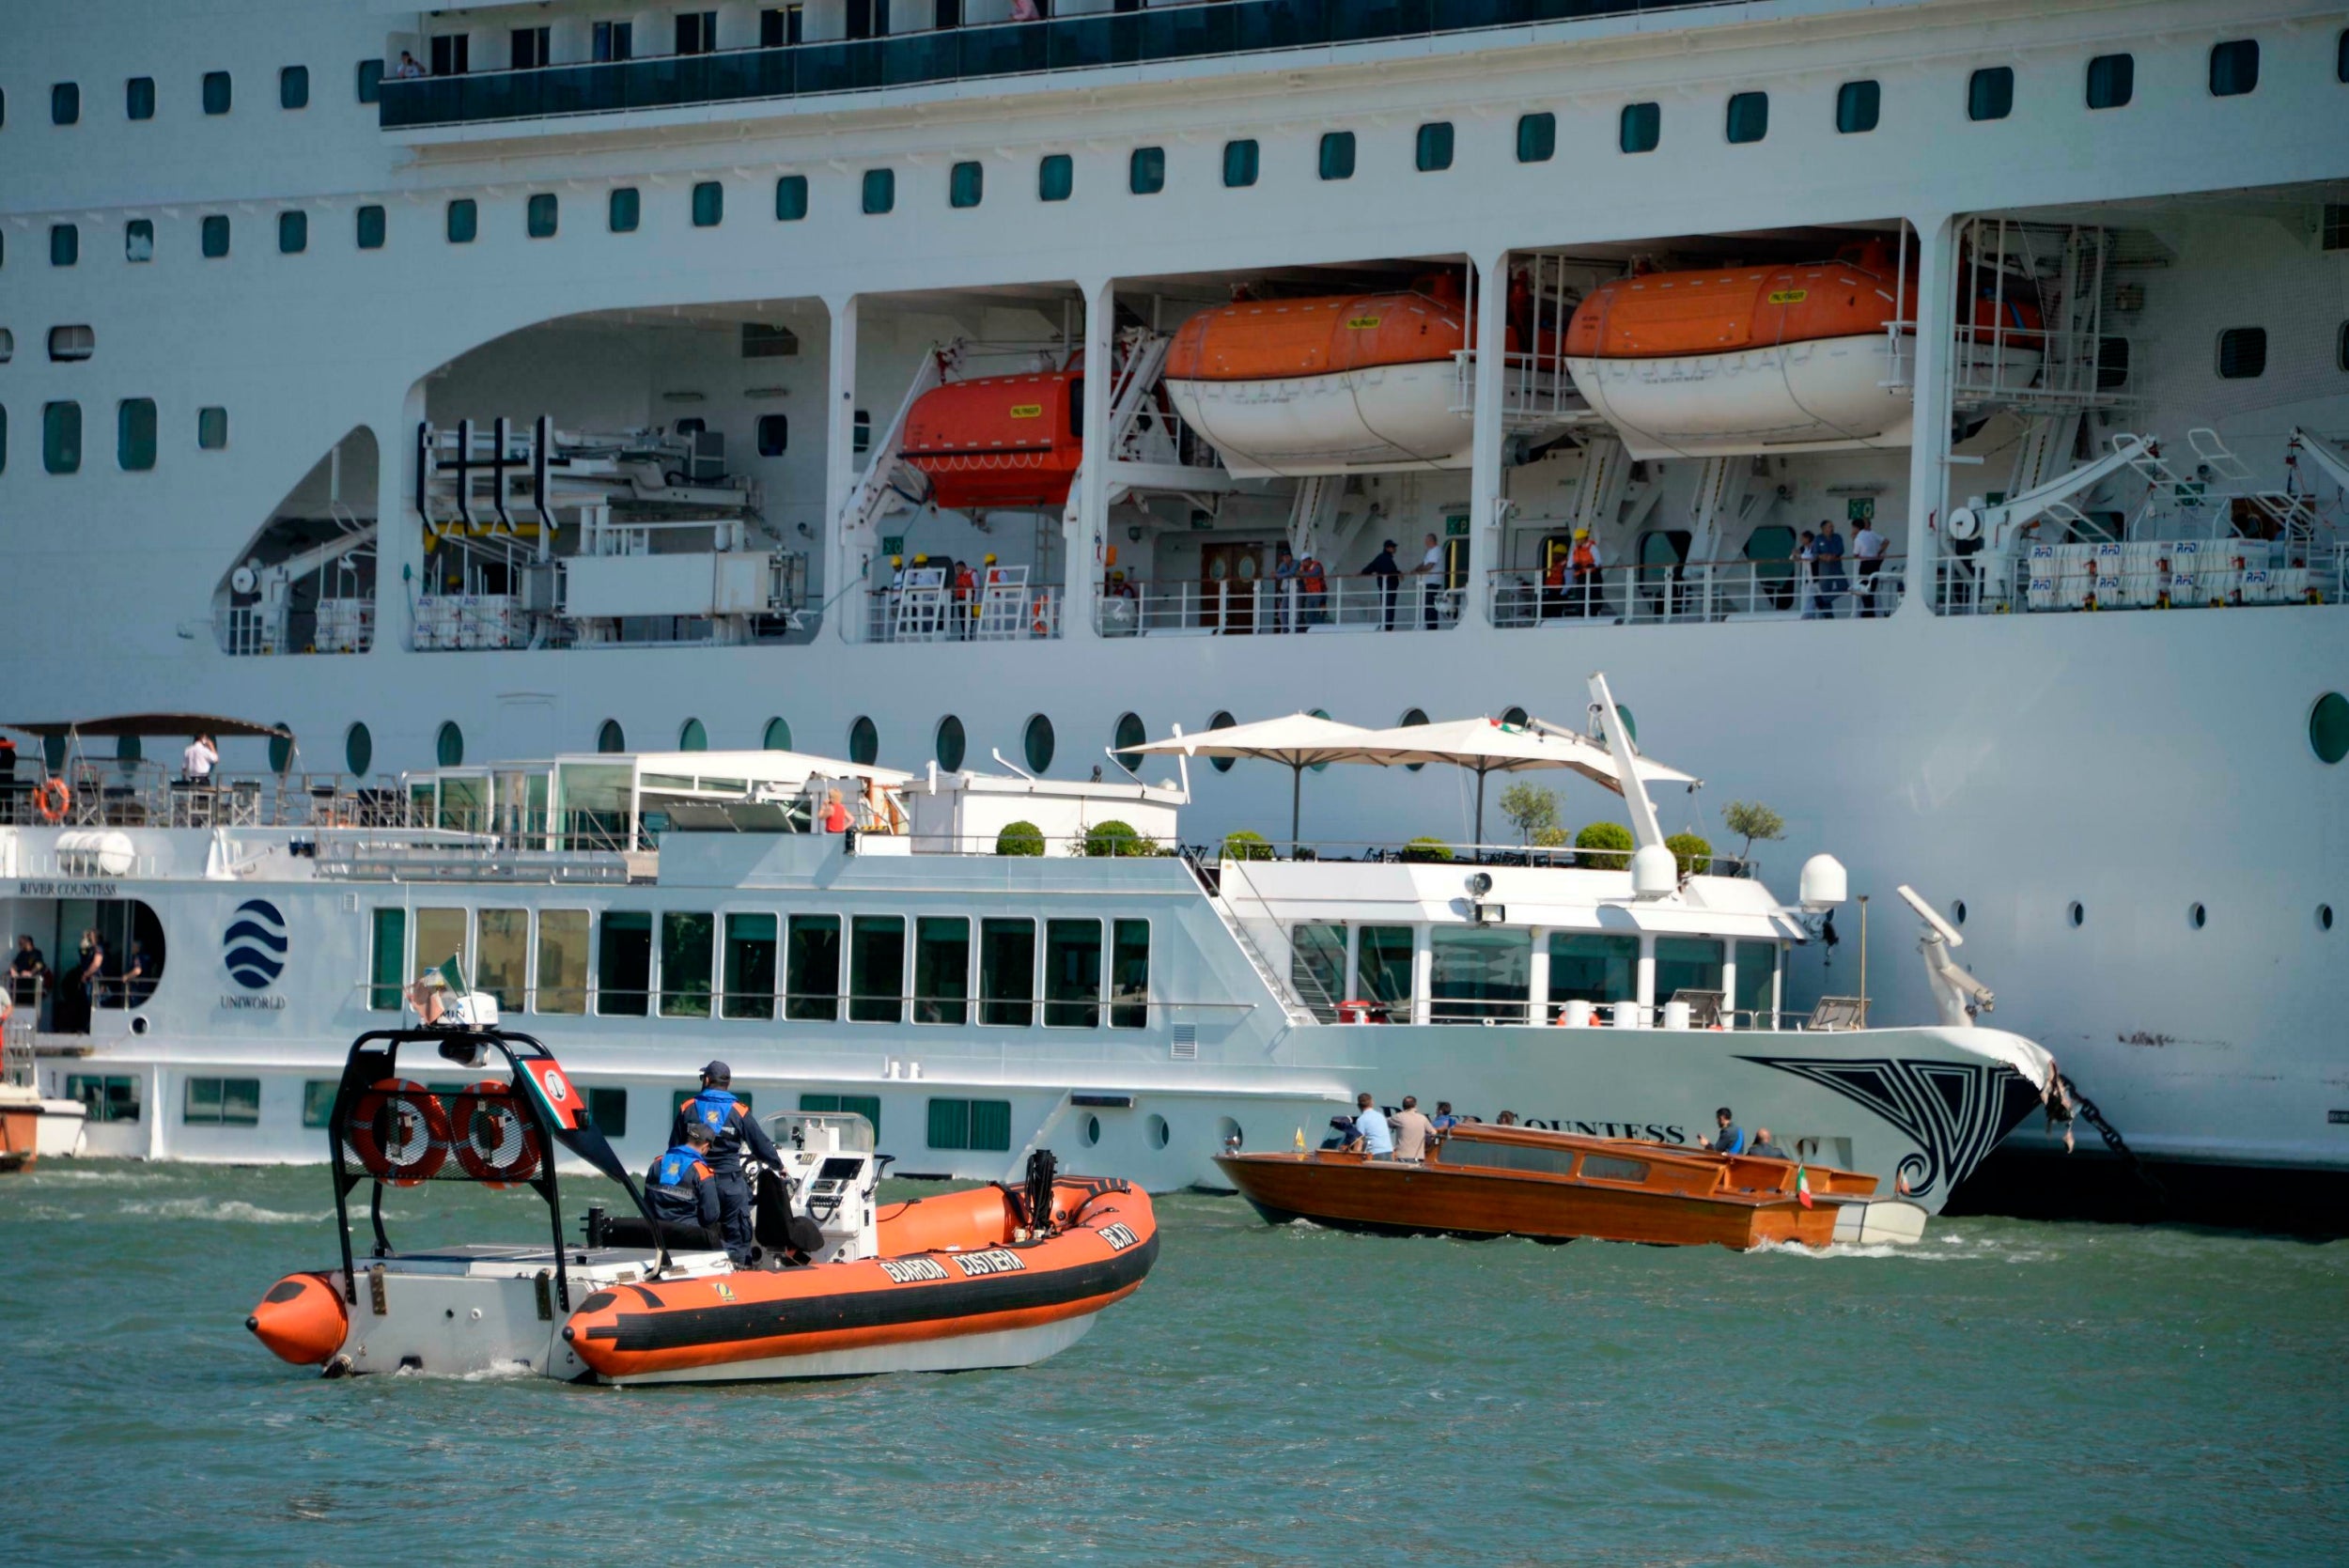 New Zealand couple were injured during River Countess collision